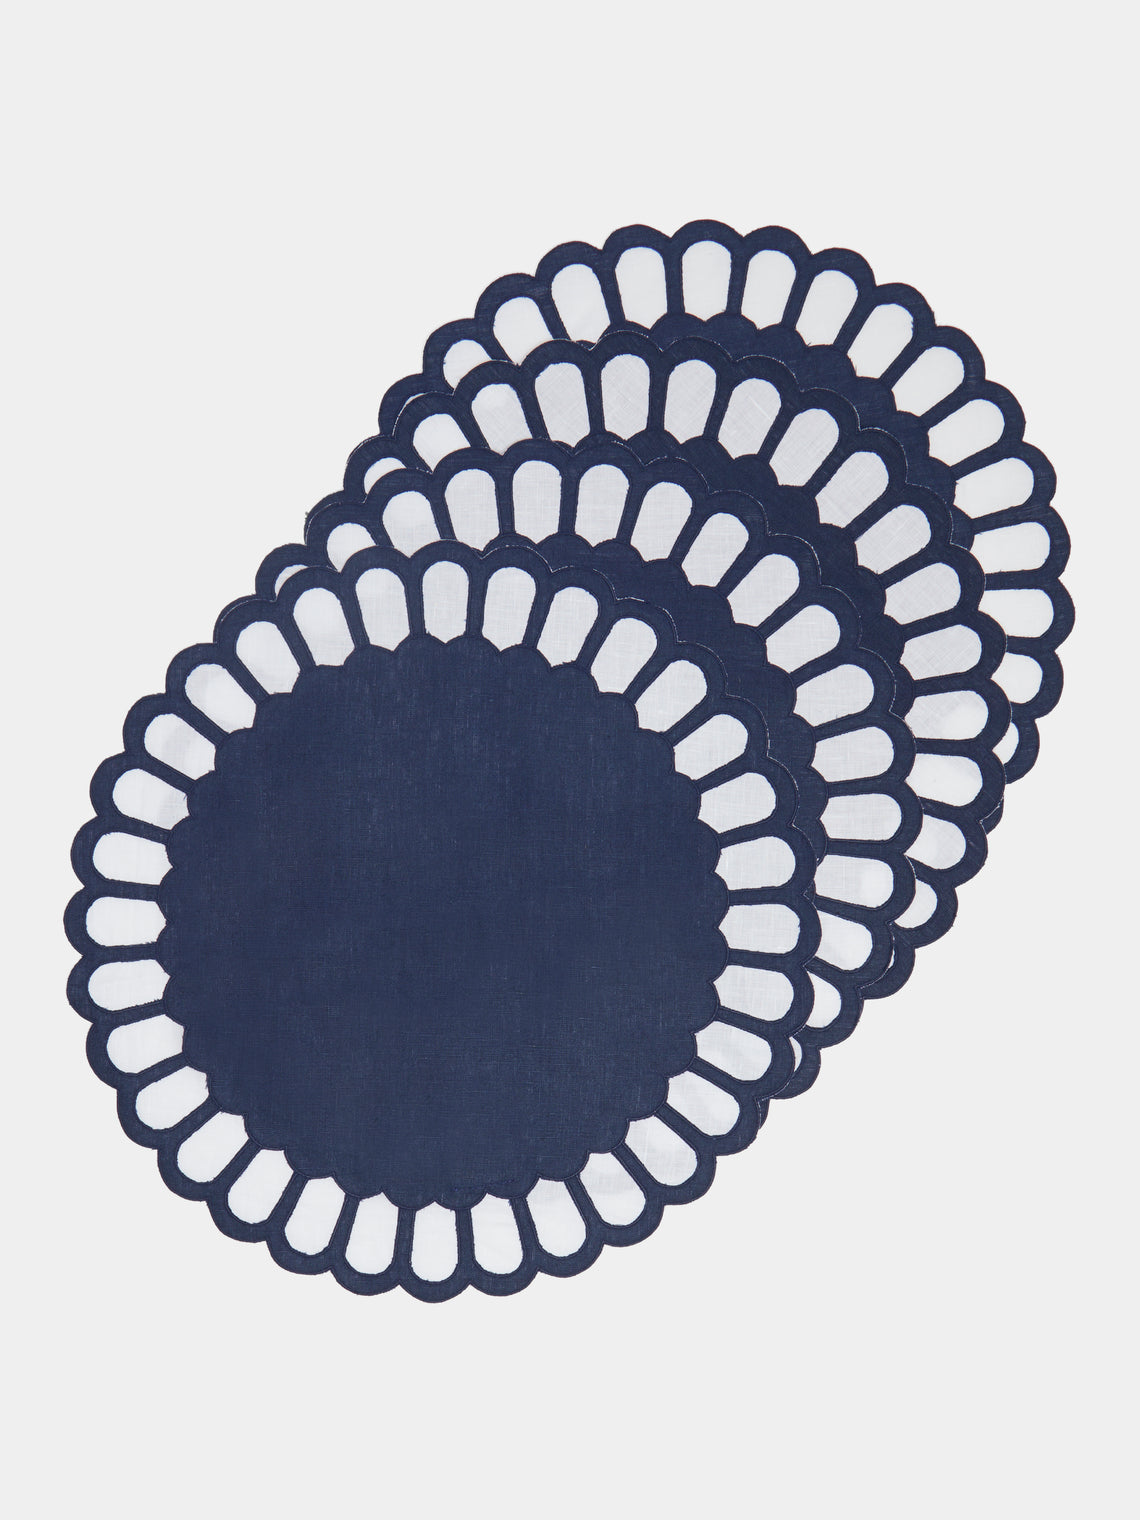 Los Encajeros - Zurbano Embroidered Linen Placemats (Set of 4) - Blue - ABASK